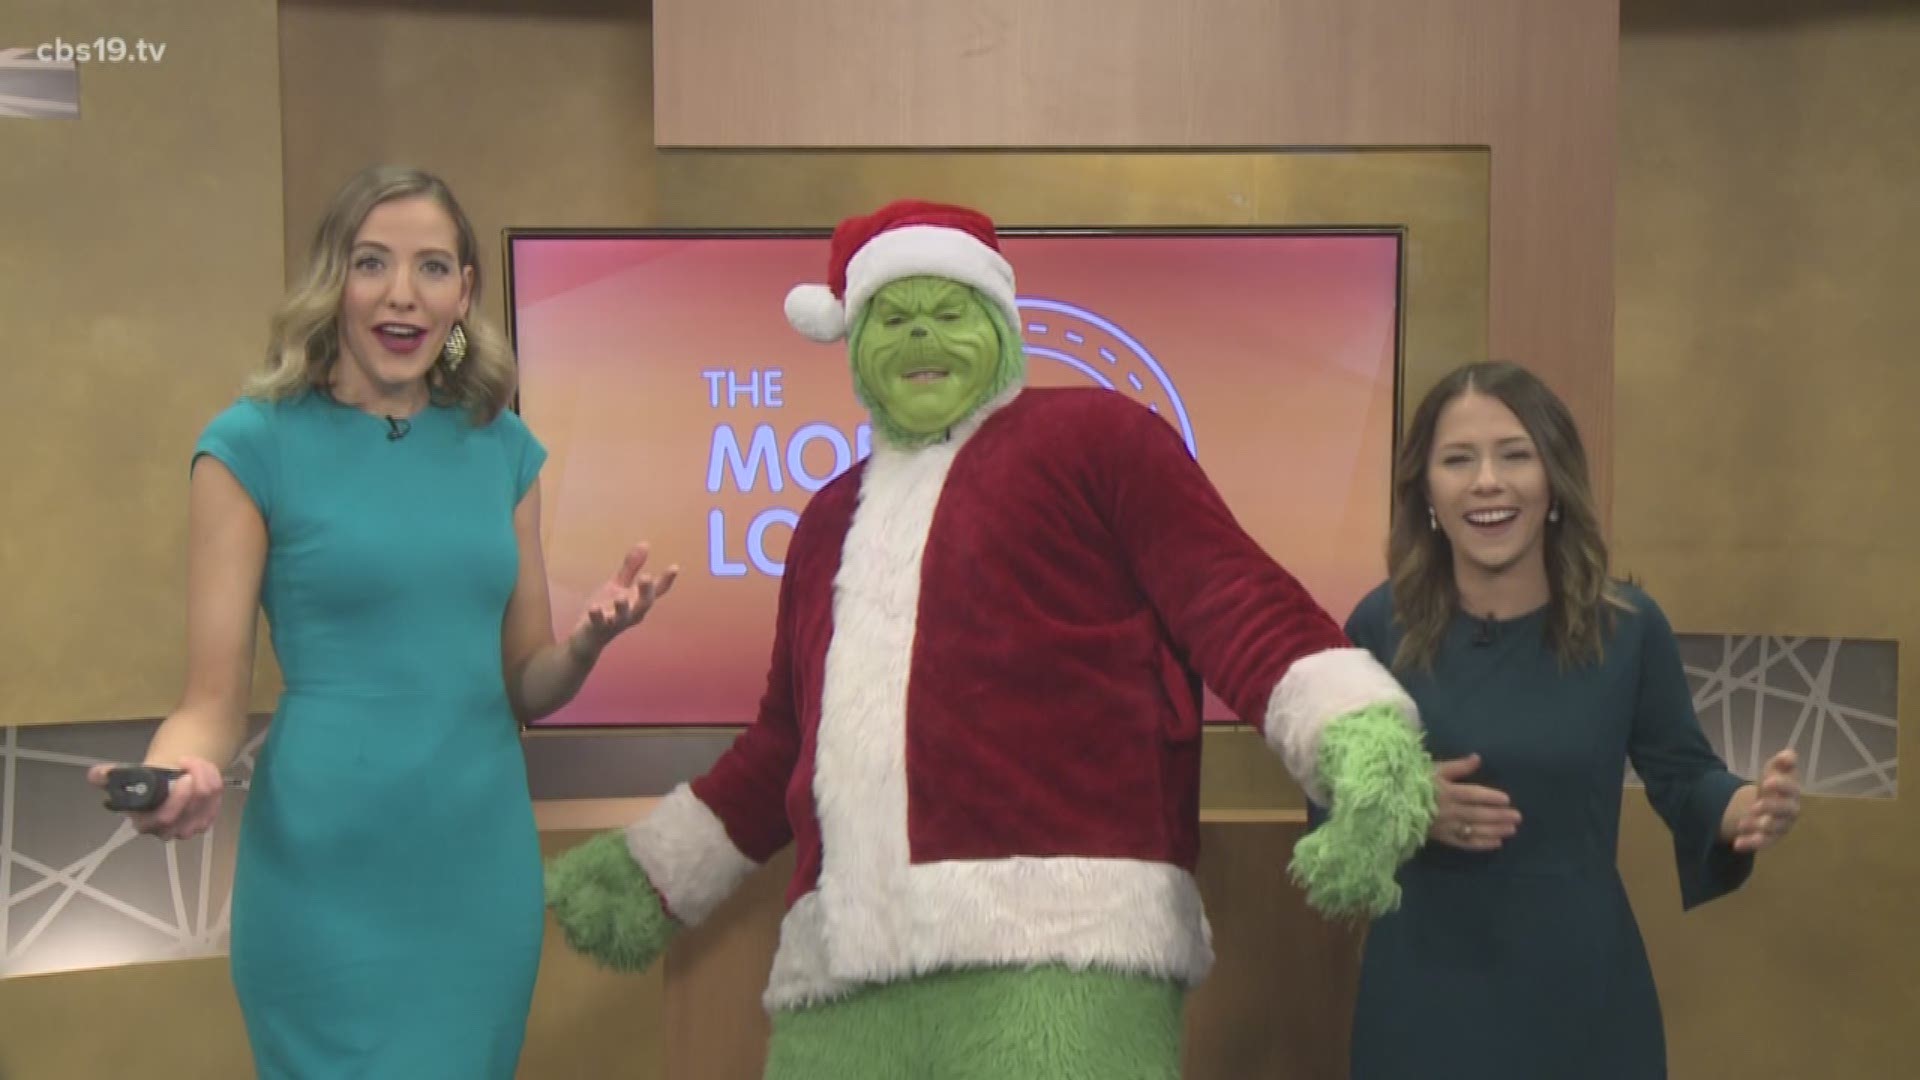 He's mean, he's green and he lives in Palestine! The Grinch makes a special guest appearance on The Morning Loop.